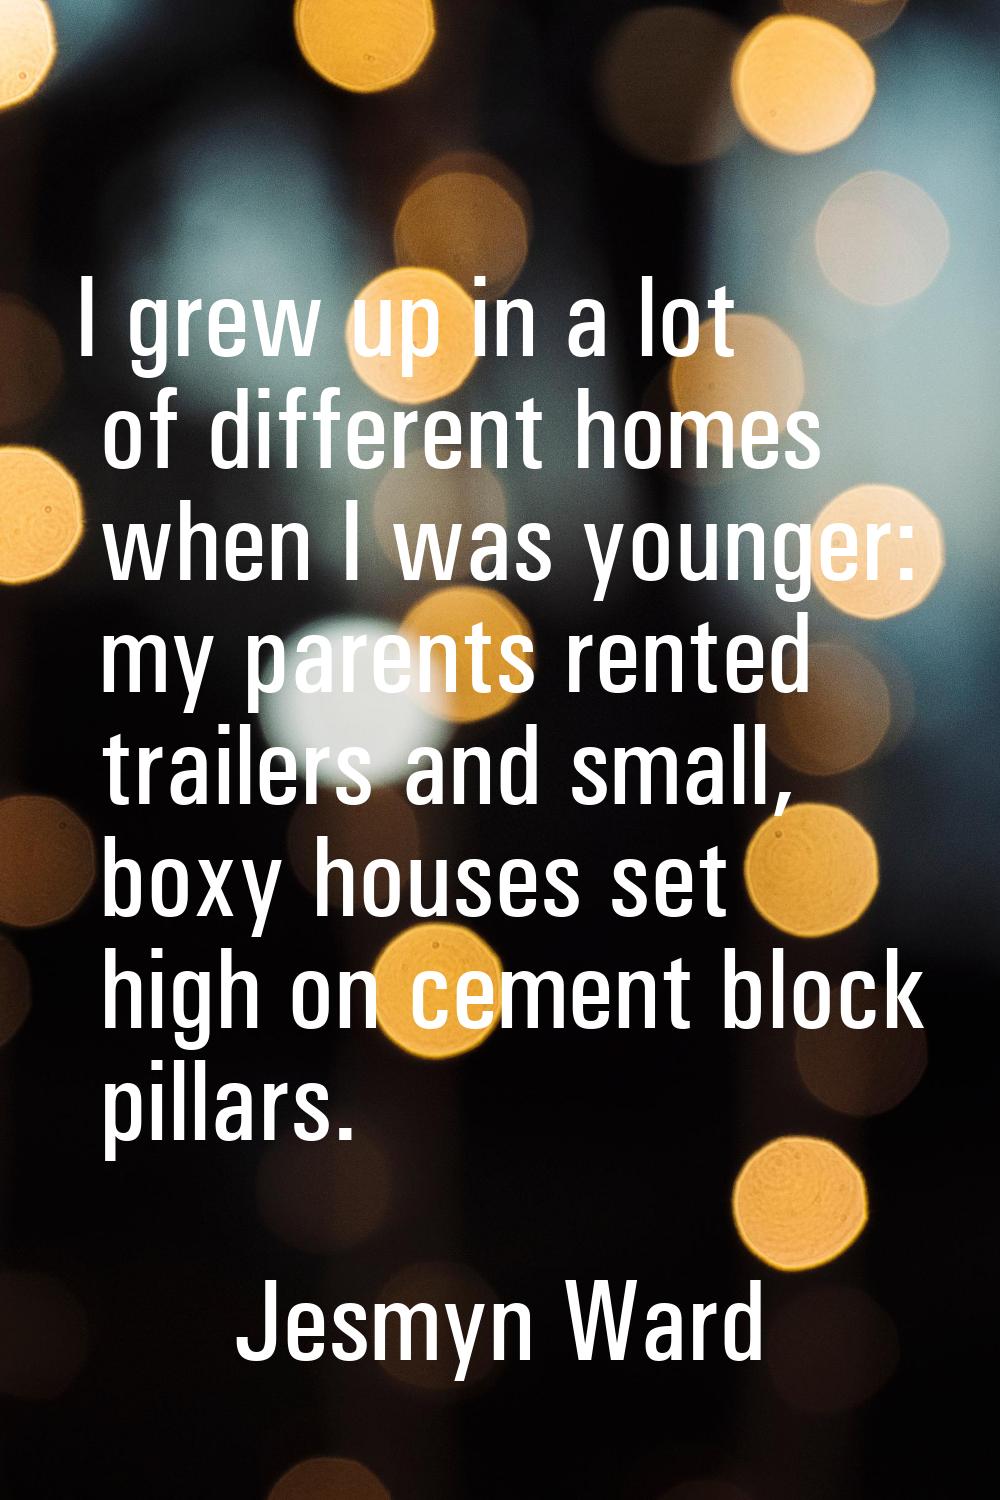 I grew up in a lot of different homes when I was younger: my parents rented trailers and small, box